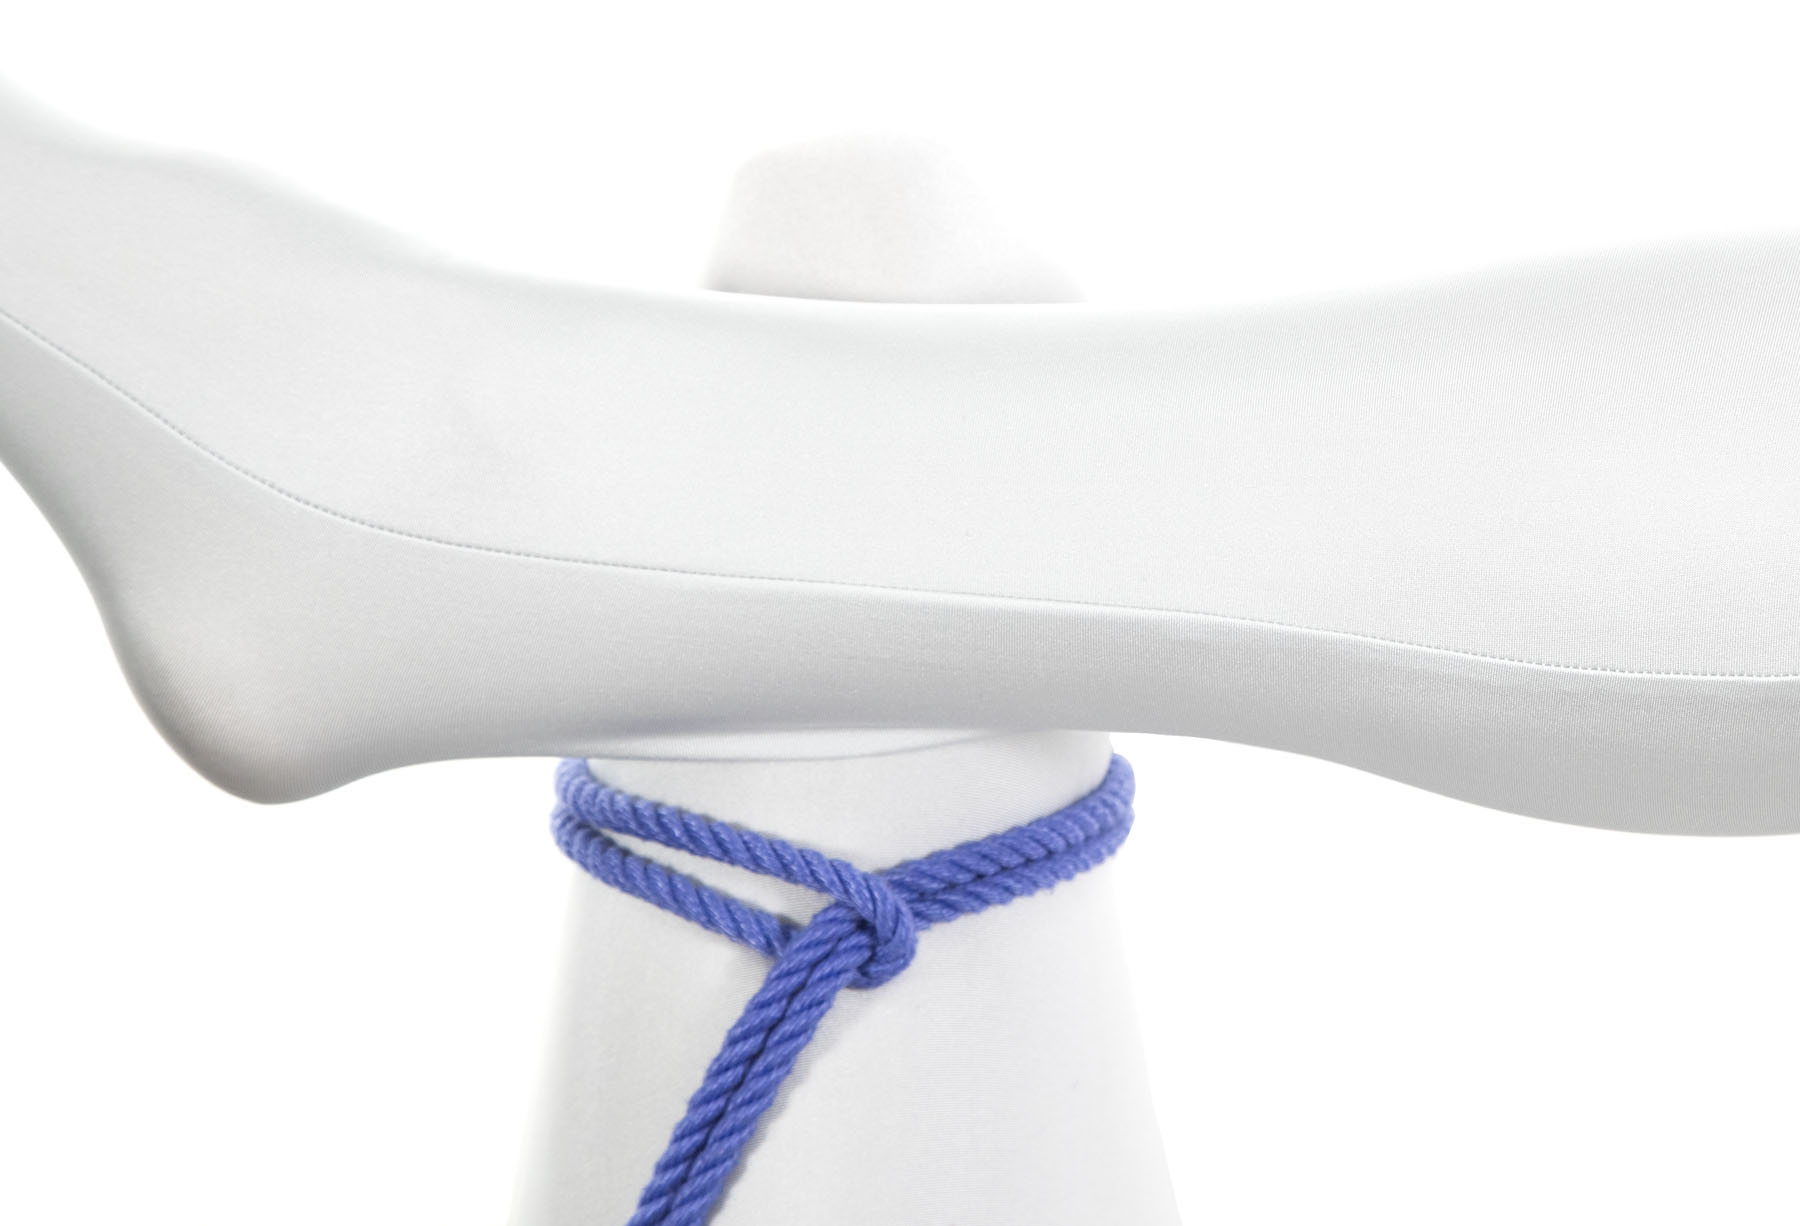 We are looking down at the legs of a seated person in a white bodysuit. The right leg is bent and laid on top of the left leg, with the ankle of the right leg just above the knee of the left leg. The bight of a blue rope goes clockwise around the thigh of the left leg, right above where the ankle crosses it. The rope goes through the bight and is resting on top of the left leg.